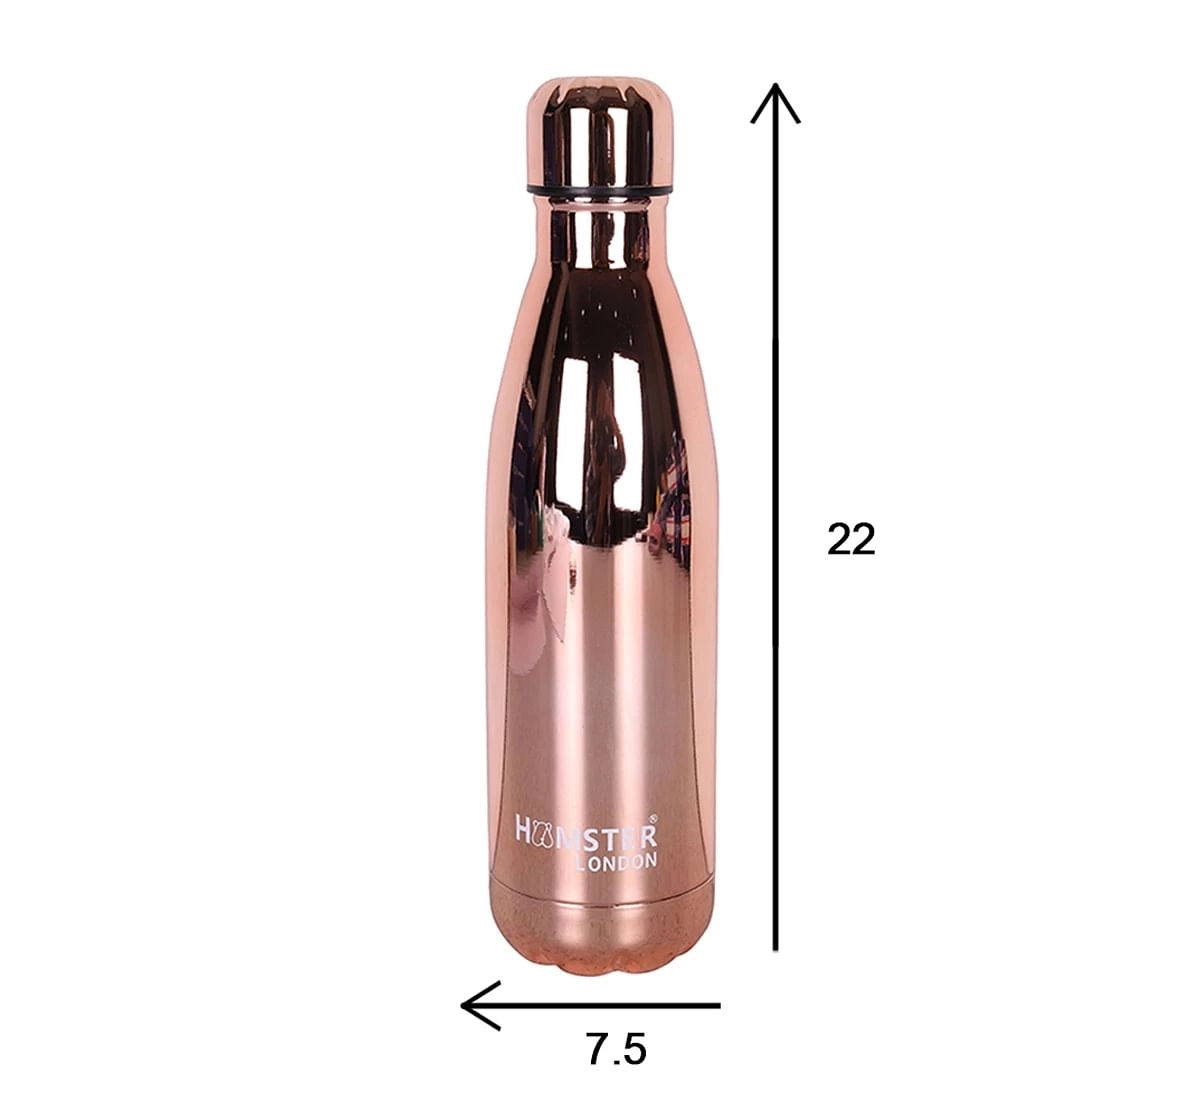 Stainless Steel Insulated Water Bottle by Hamster London for Kids, Rosegold, Non-Toxic, BPA Free, 500ml, 5Y+